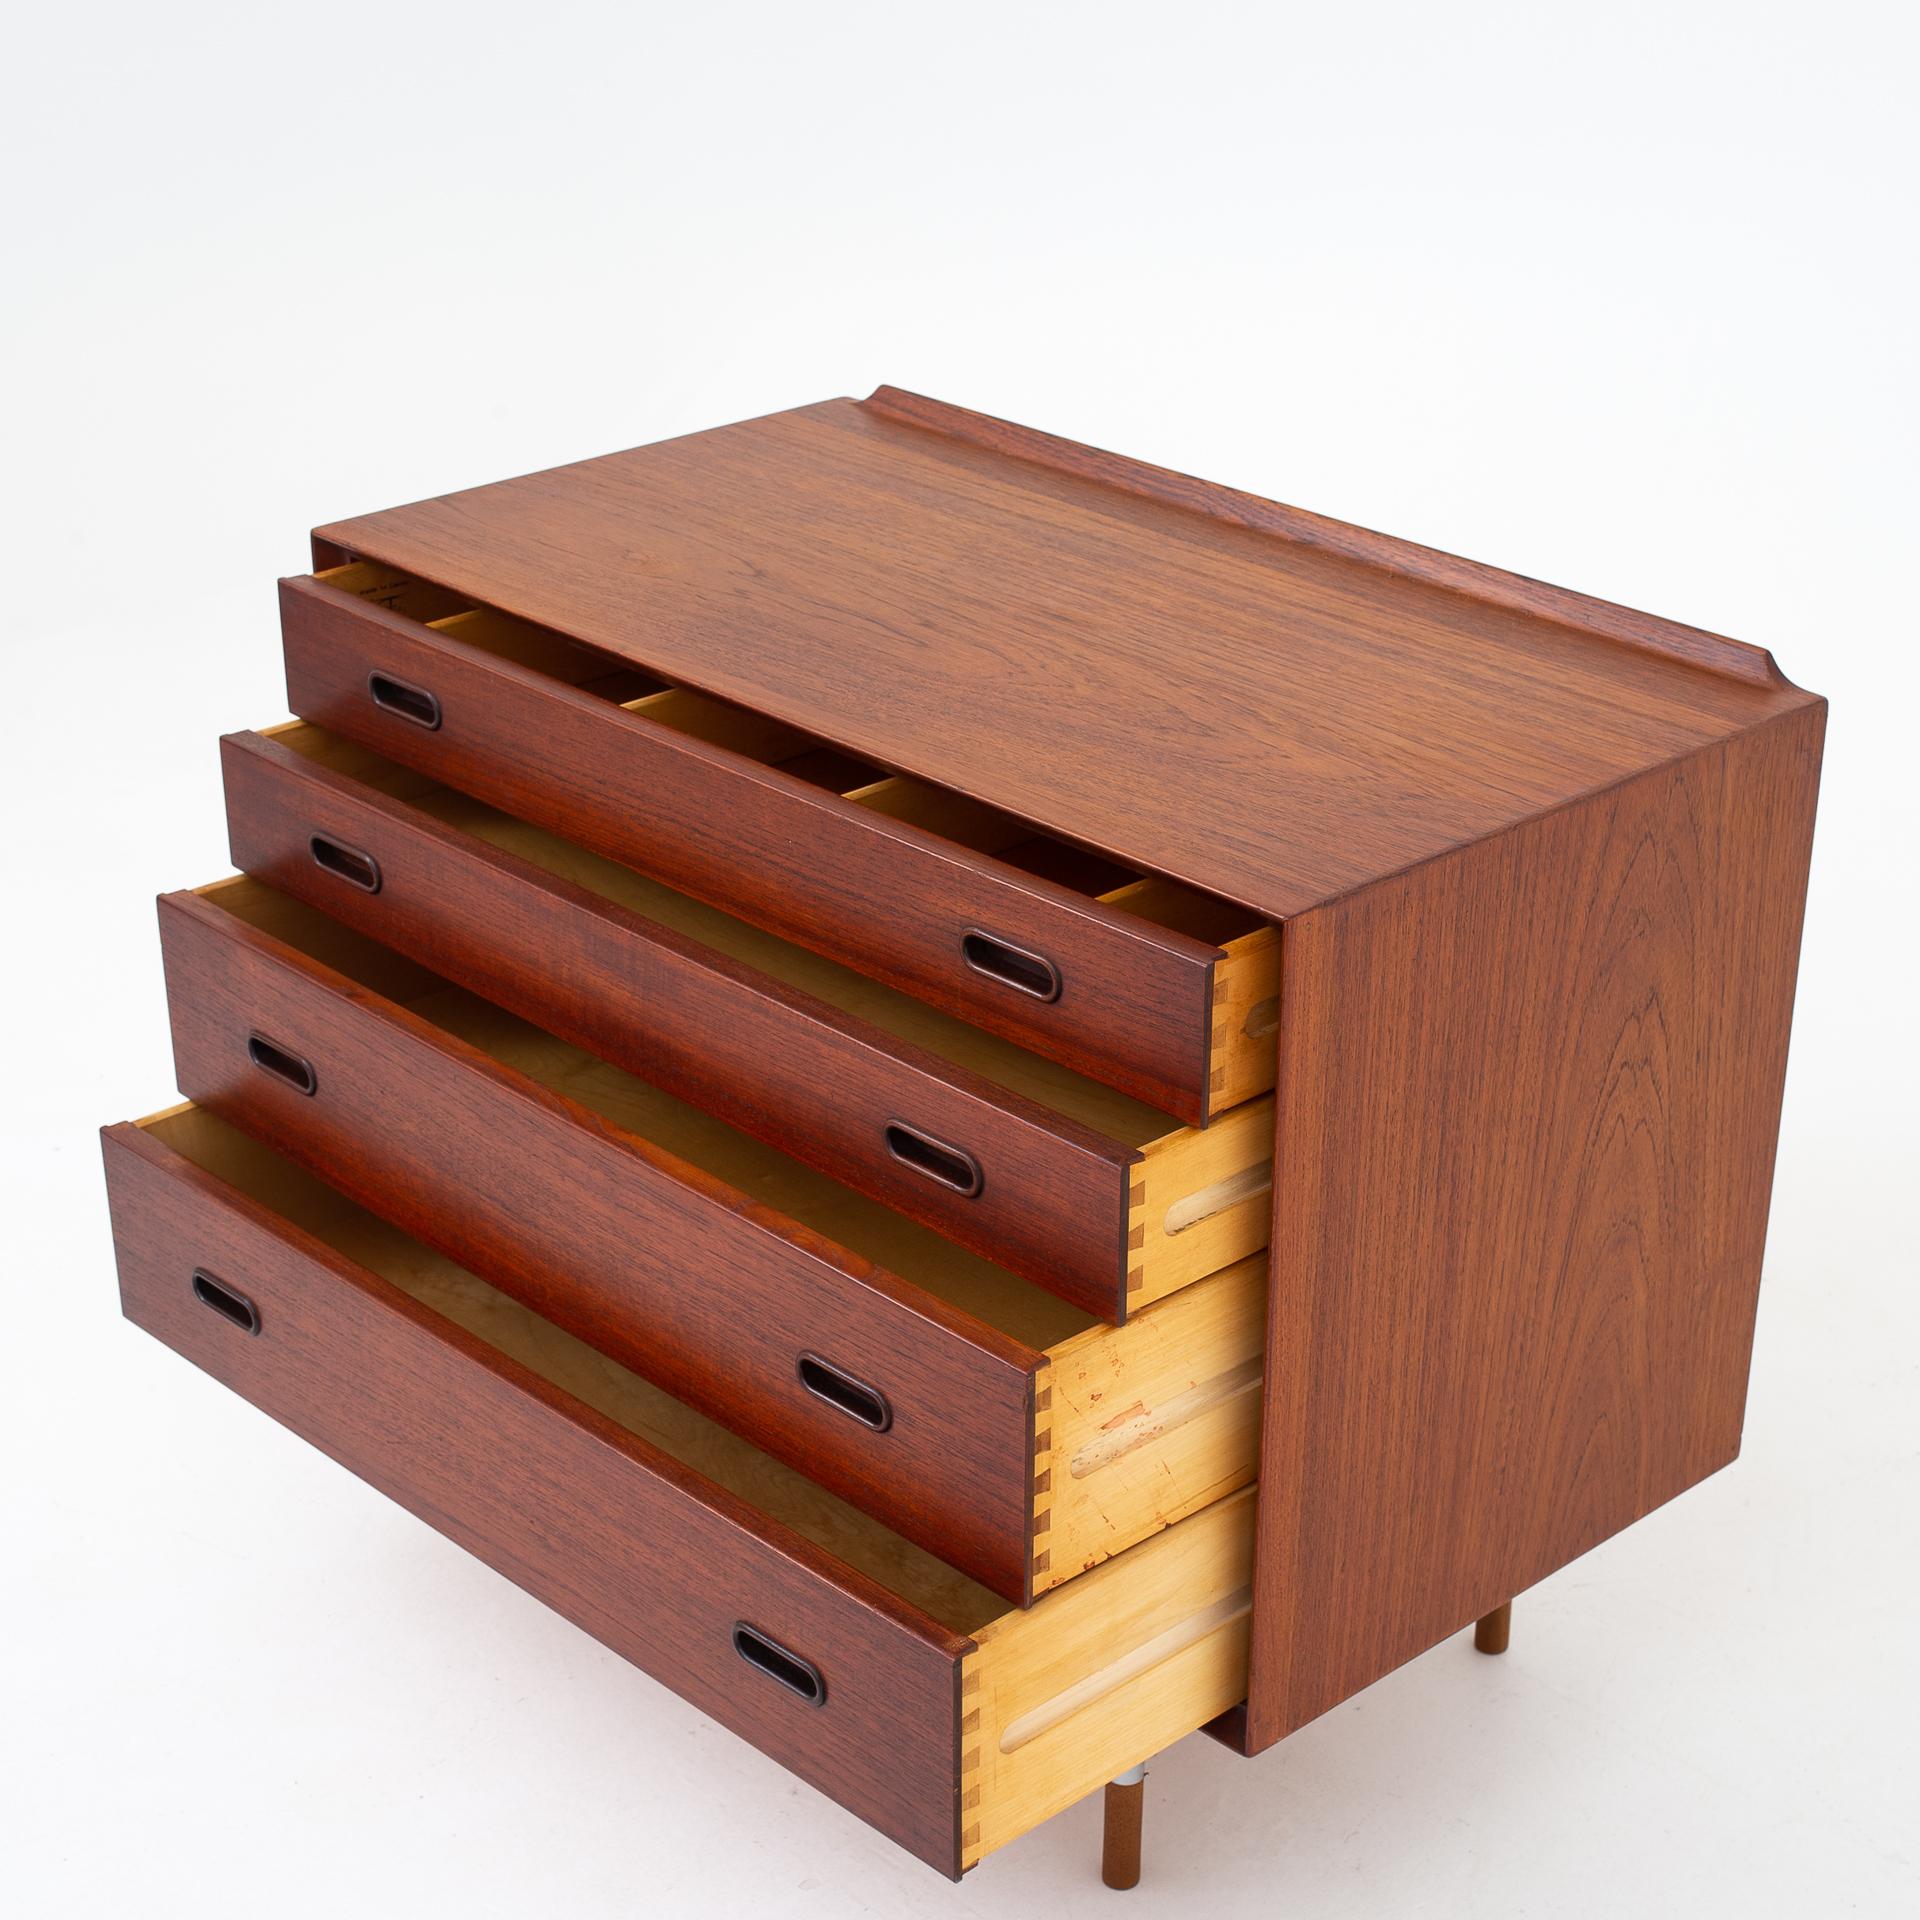 Chest of drawers in teak with round legs of steel and teak. Maker Sibast Furniture.